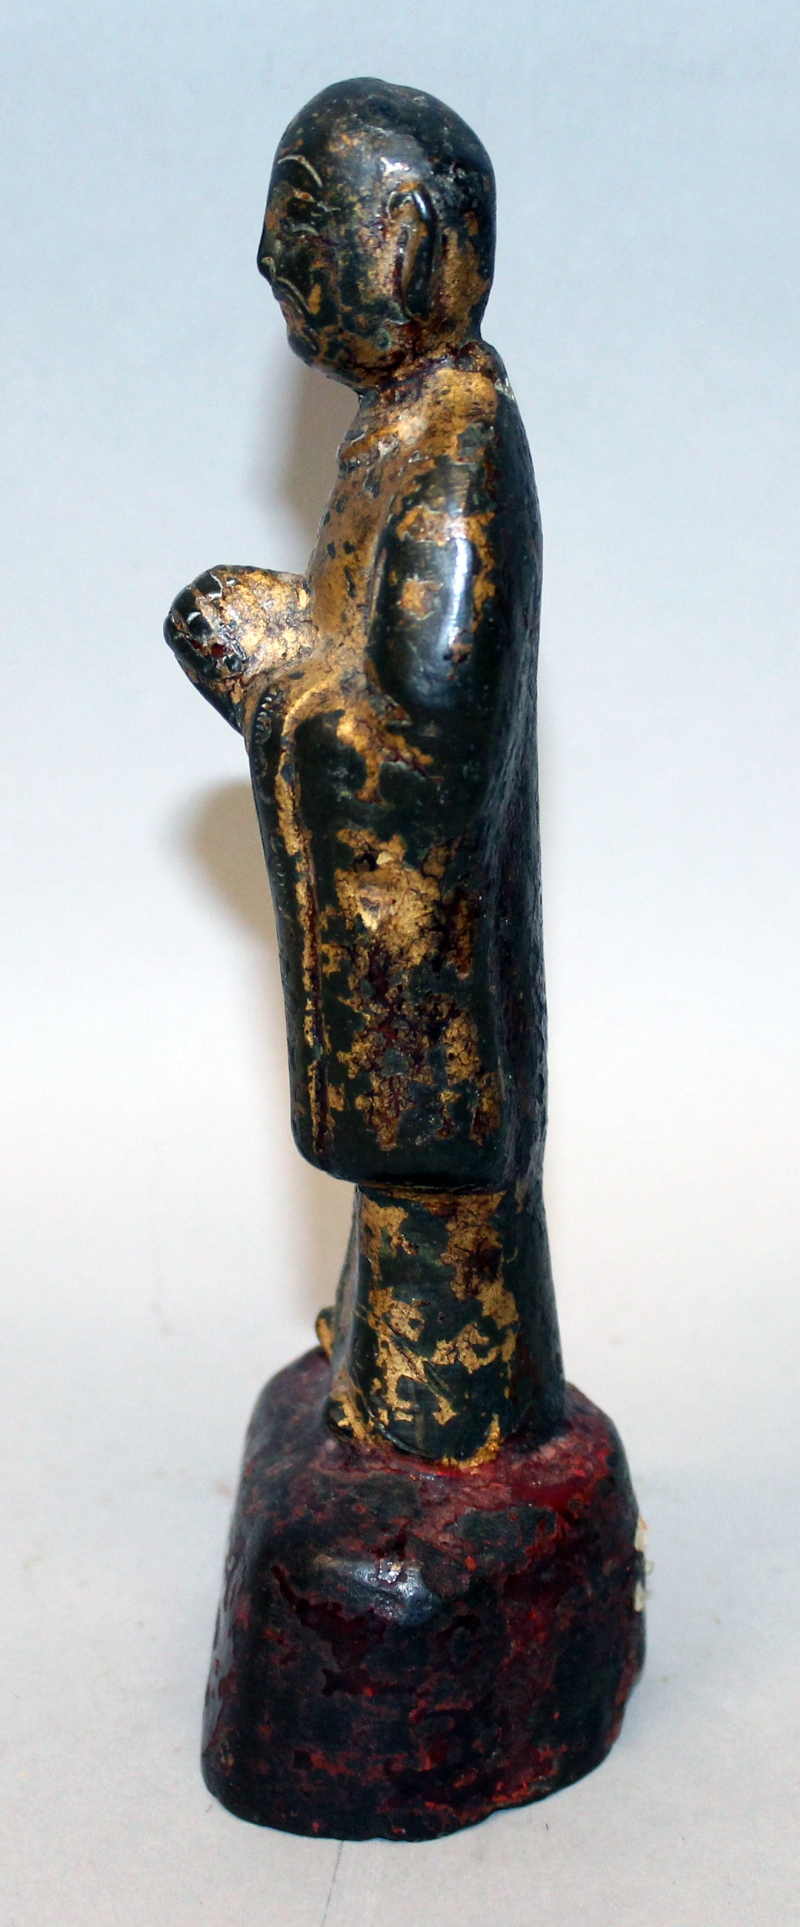 A GOOD 16TH/17TH CENTURY CHINESE GILT & LACQUERED BRONZE FIGURE OF A PRIEST, standing in flowing - Image 4 of 6